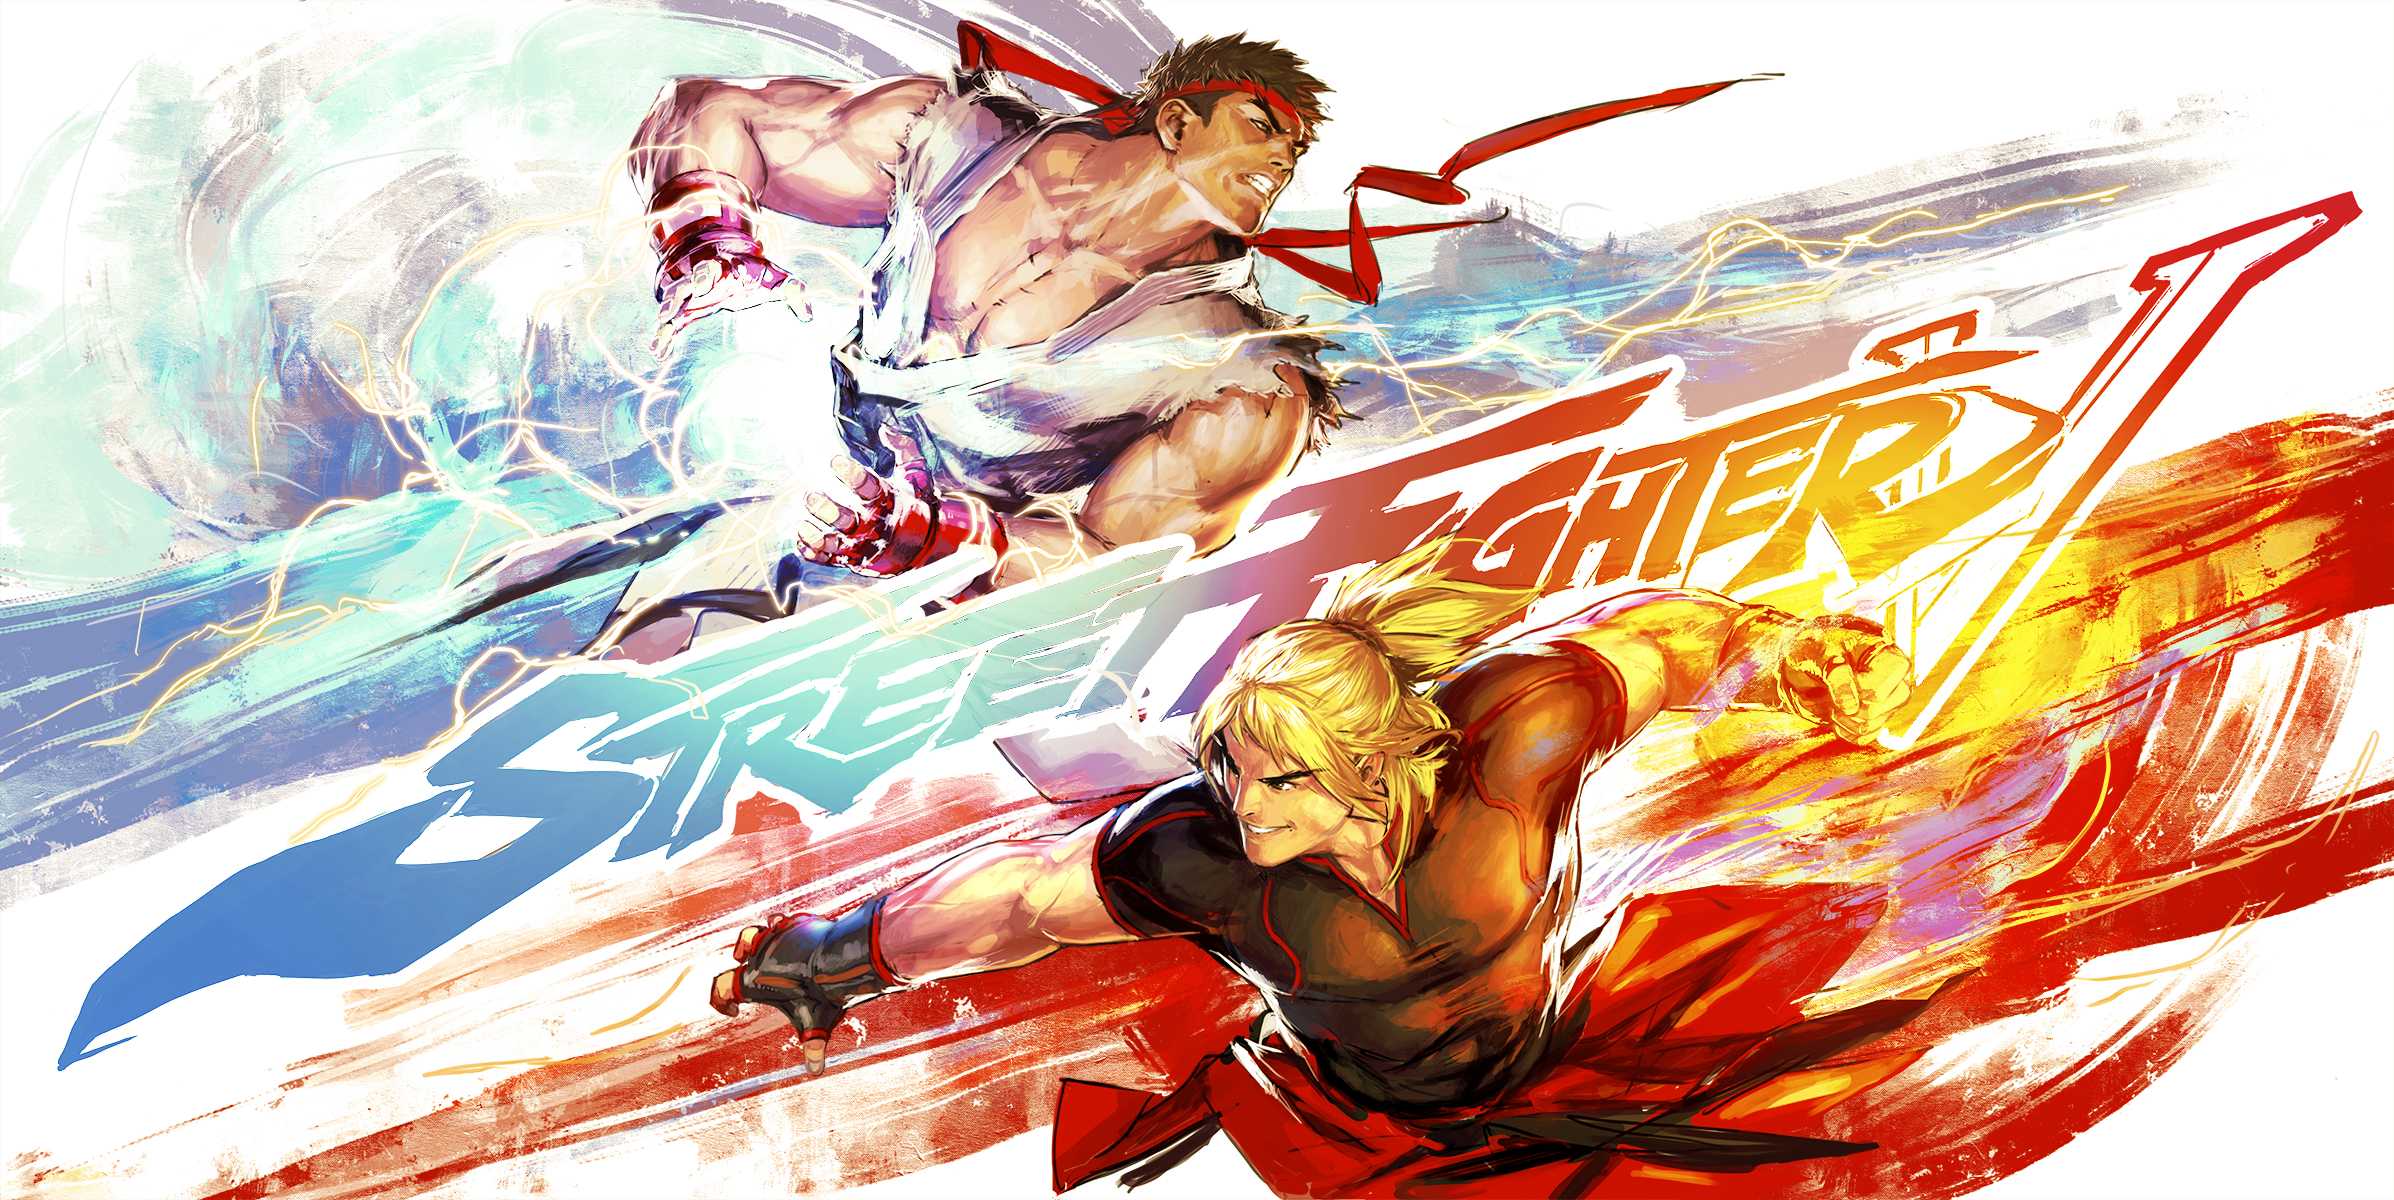 On Club Street Fighter Widescreen Wallpaper Of Pc High Resolution